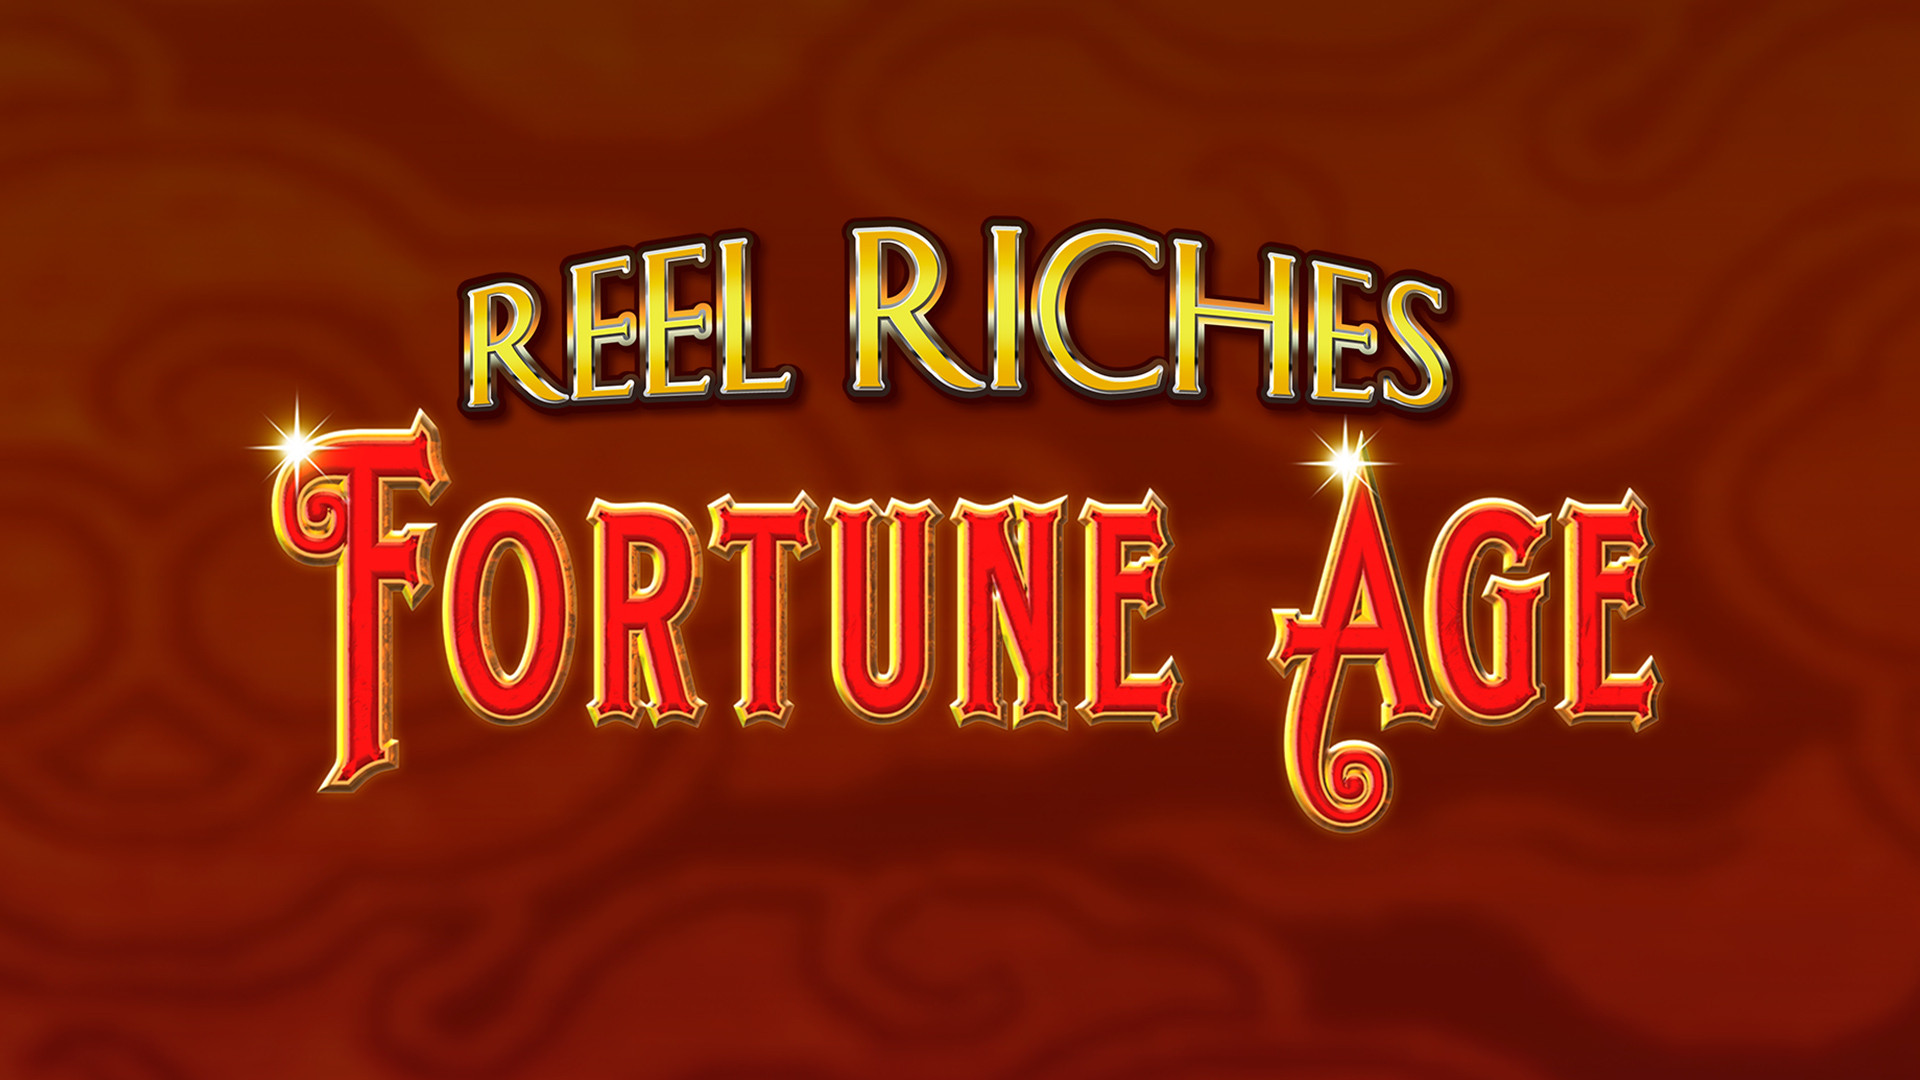 Reel riches Fortune Age